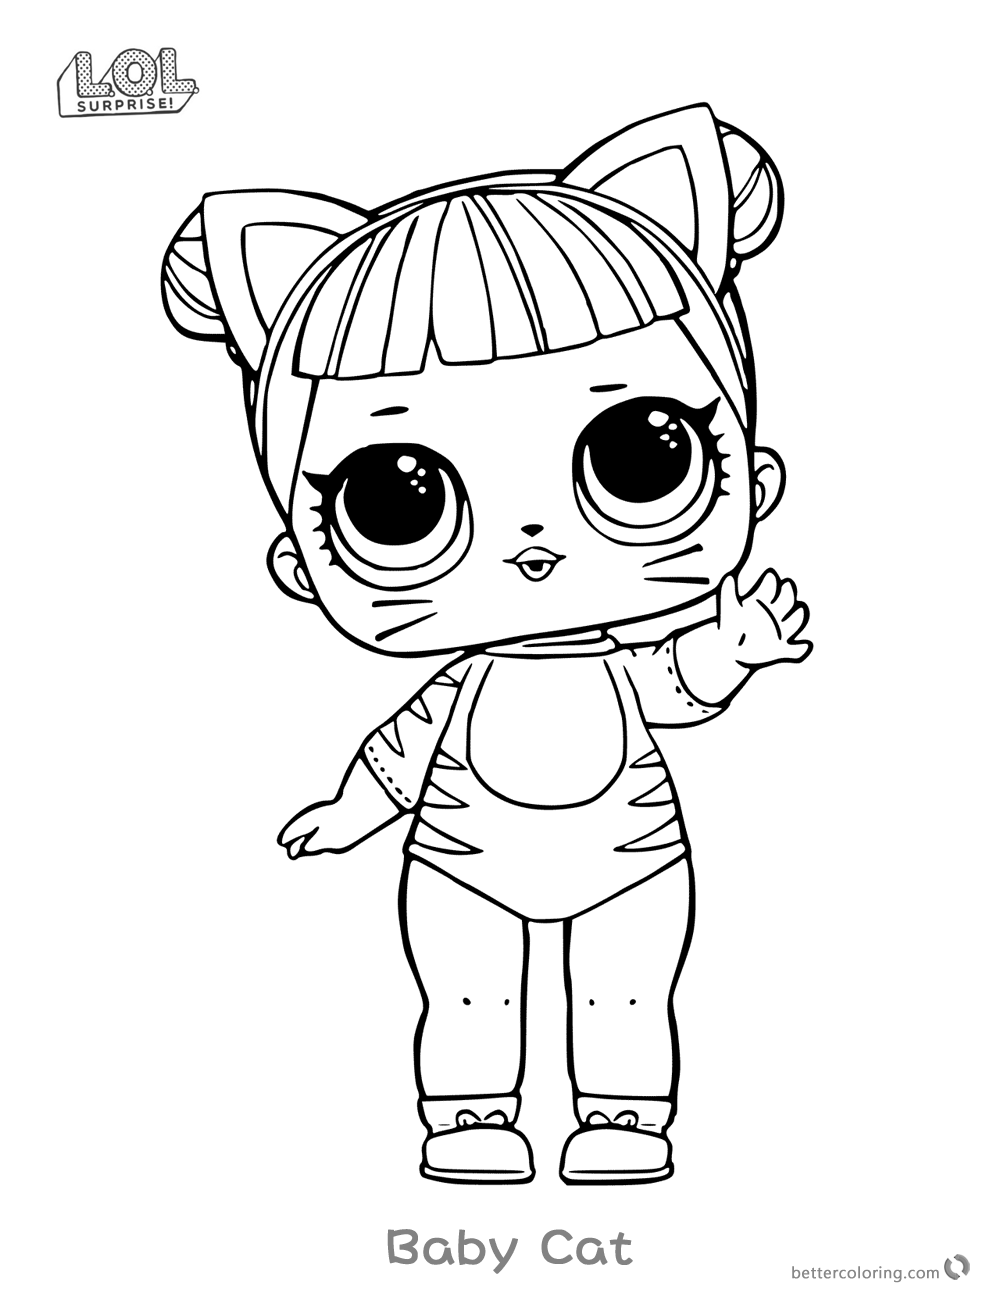 Lol Surprise Doll Coloring Pages at GetColorings.com | Free printable